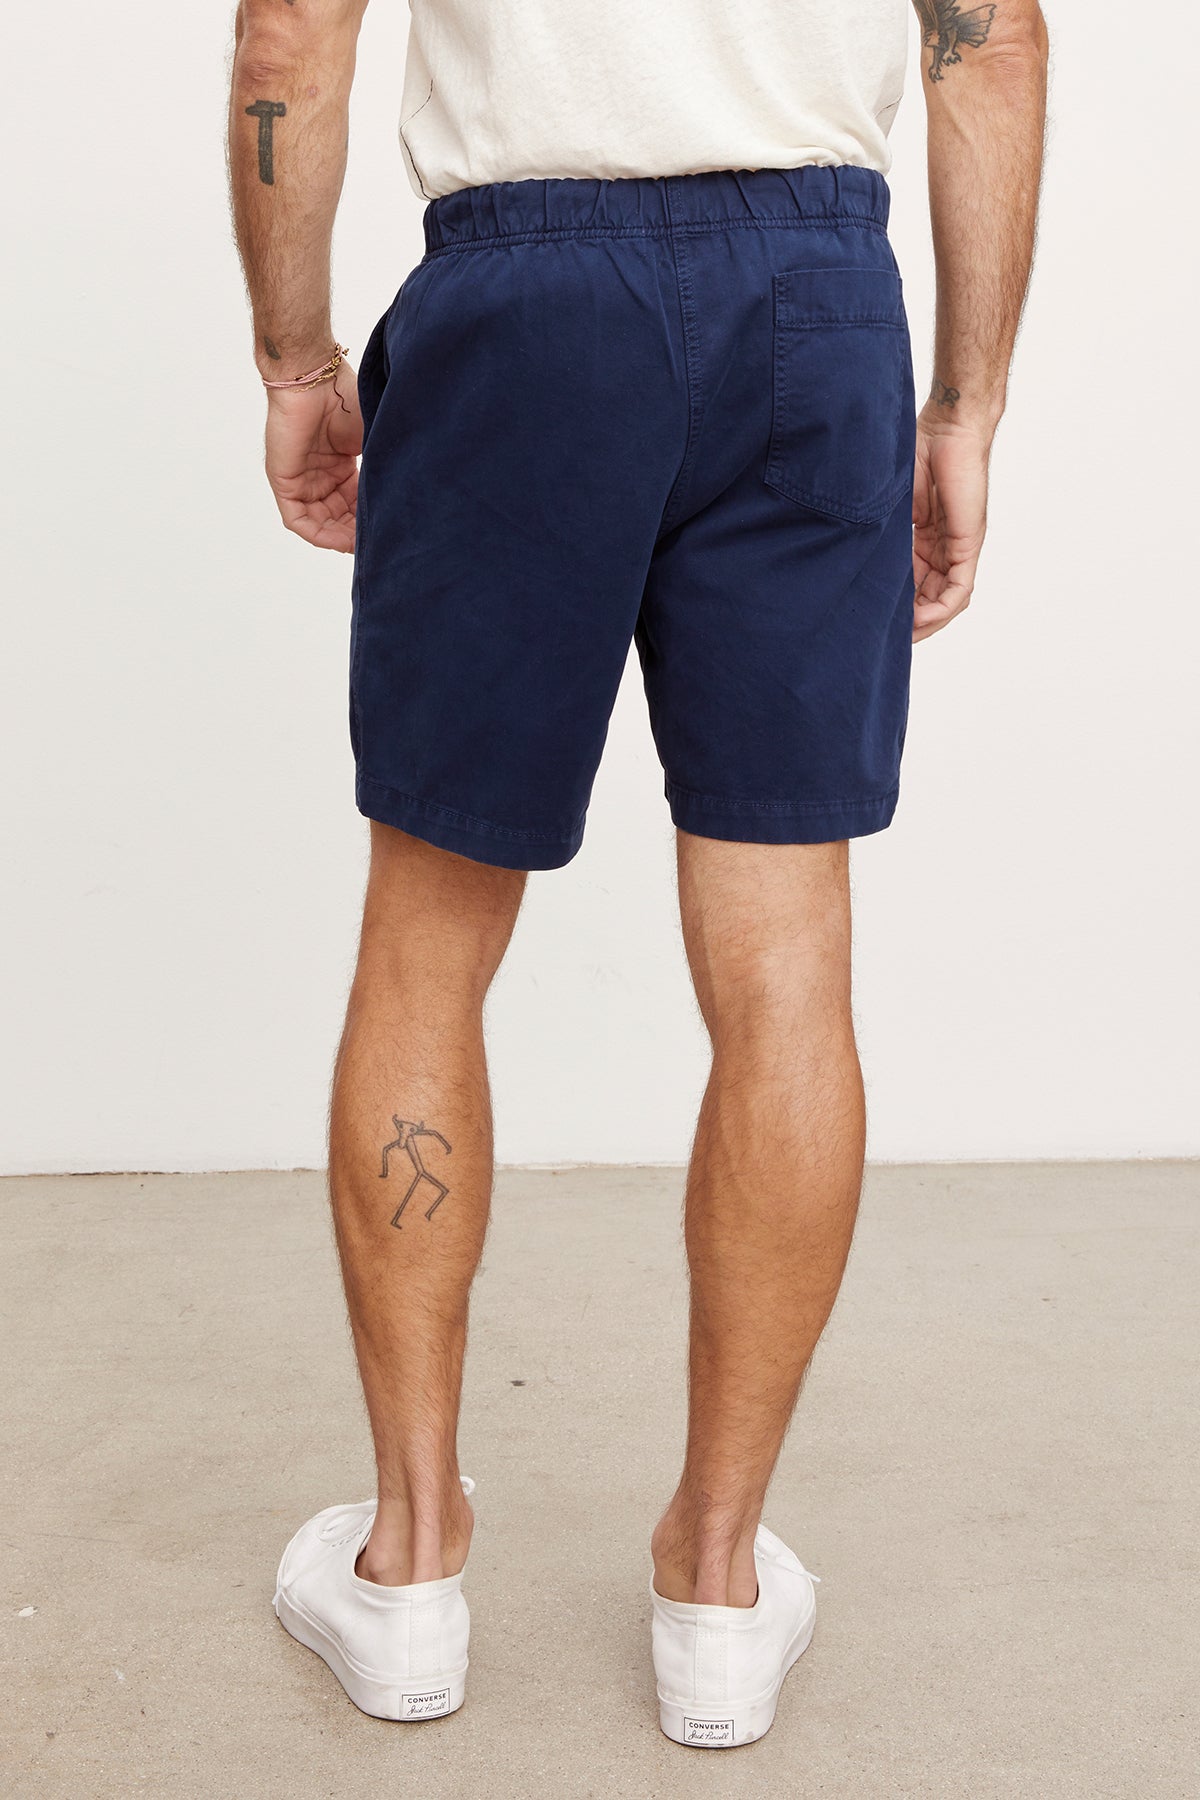 A man viewed from behind wearing navy blue cotton twill Velvet by Graham & Spencer Fielder shorts and white sneakers, standing with hands in pockets; visible tattoos on his legs.-36909292388545